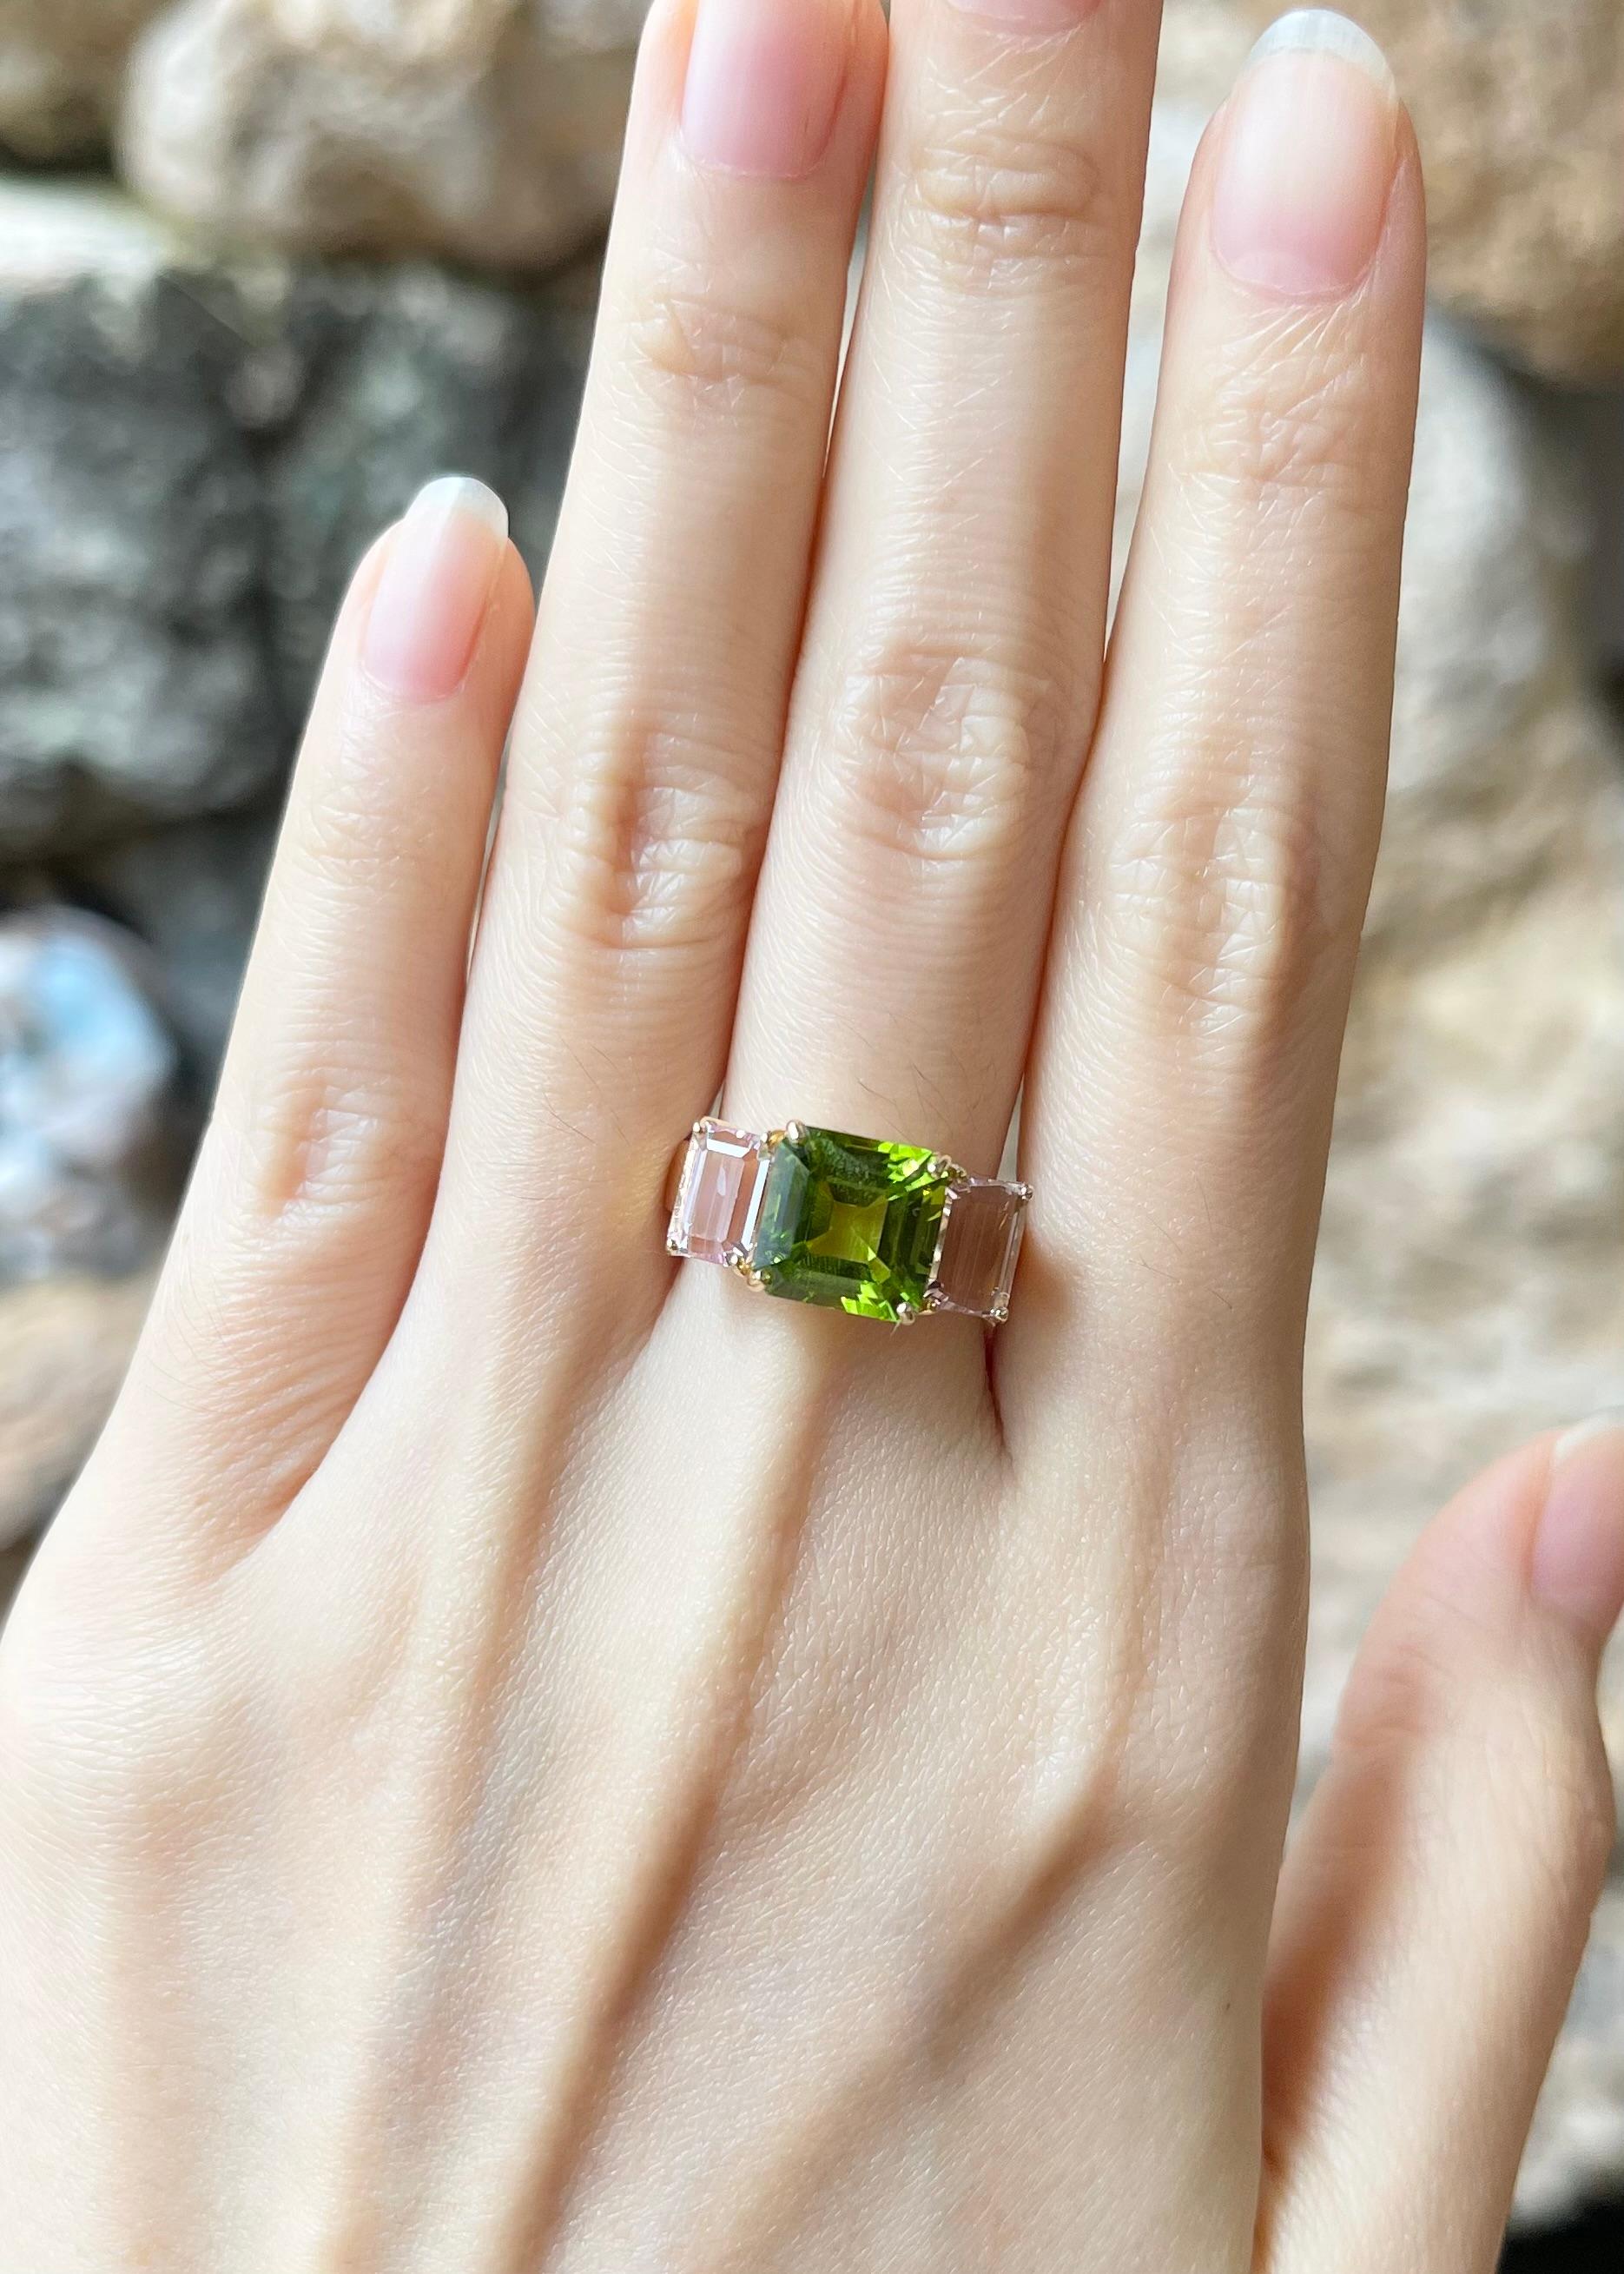 Peridot 3.95 carats with Morganite 2.28 carats Ring set in 18k Gold Settings

Width:  1.8 cm 
Length: 0.9 cm
Ring Size: 54
Total Weight: 6.70 grams

